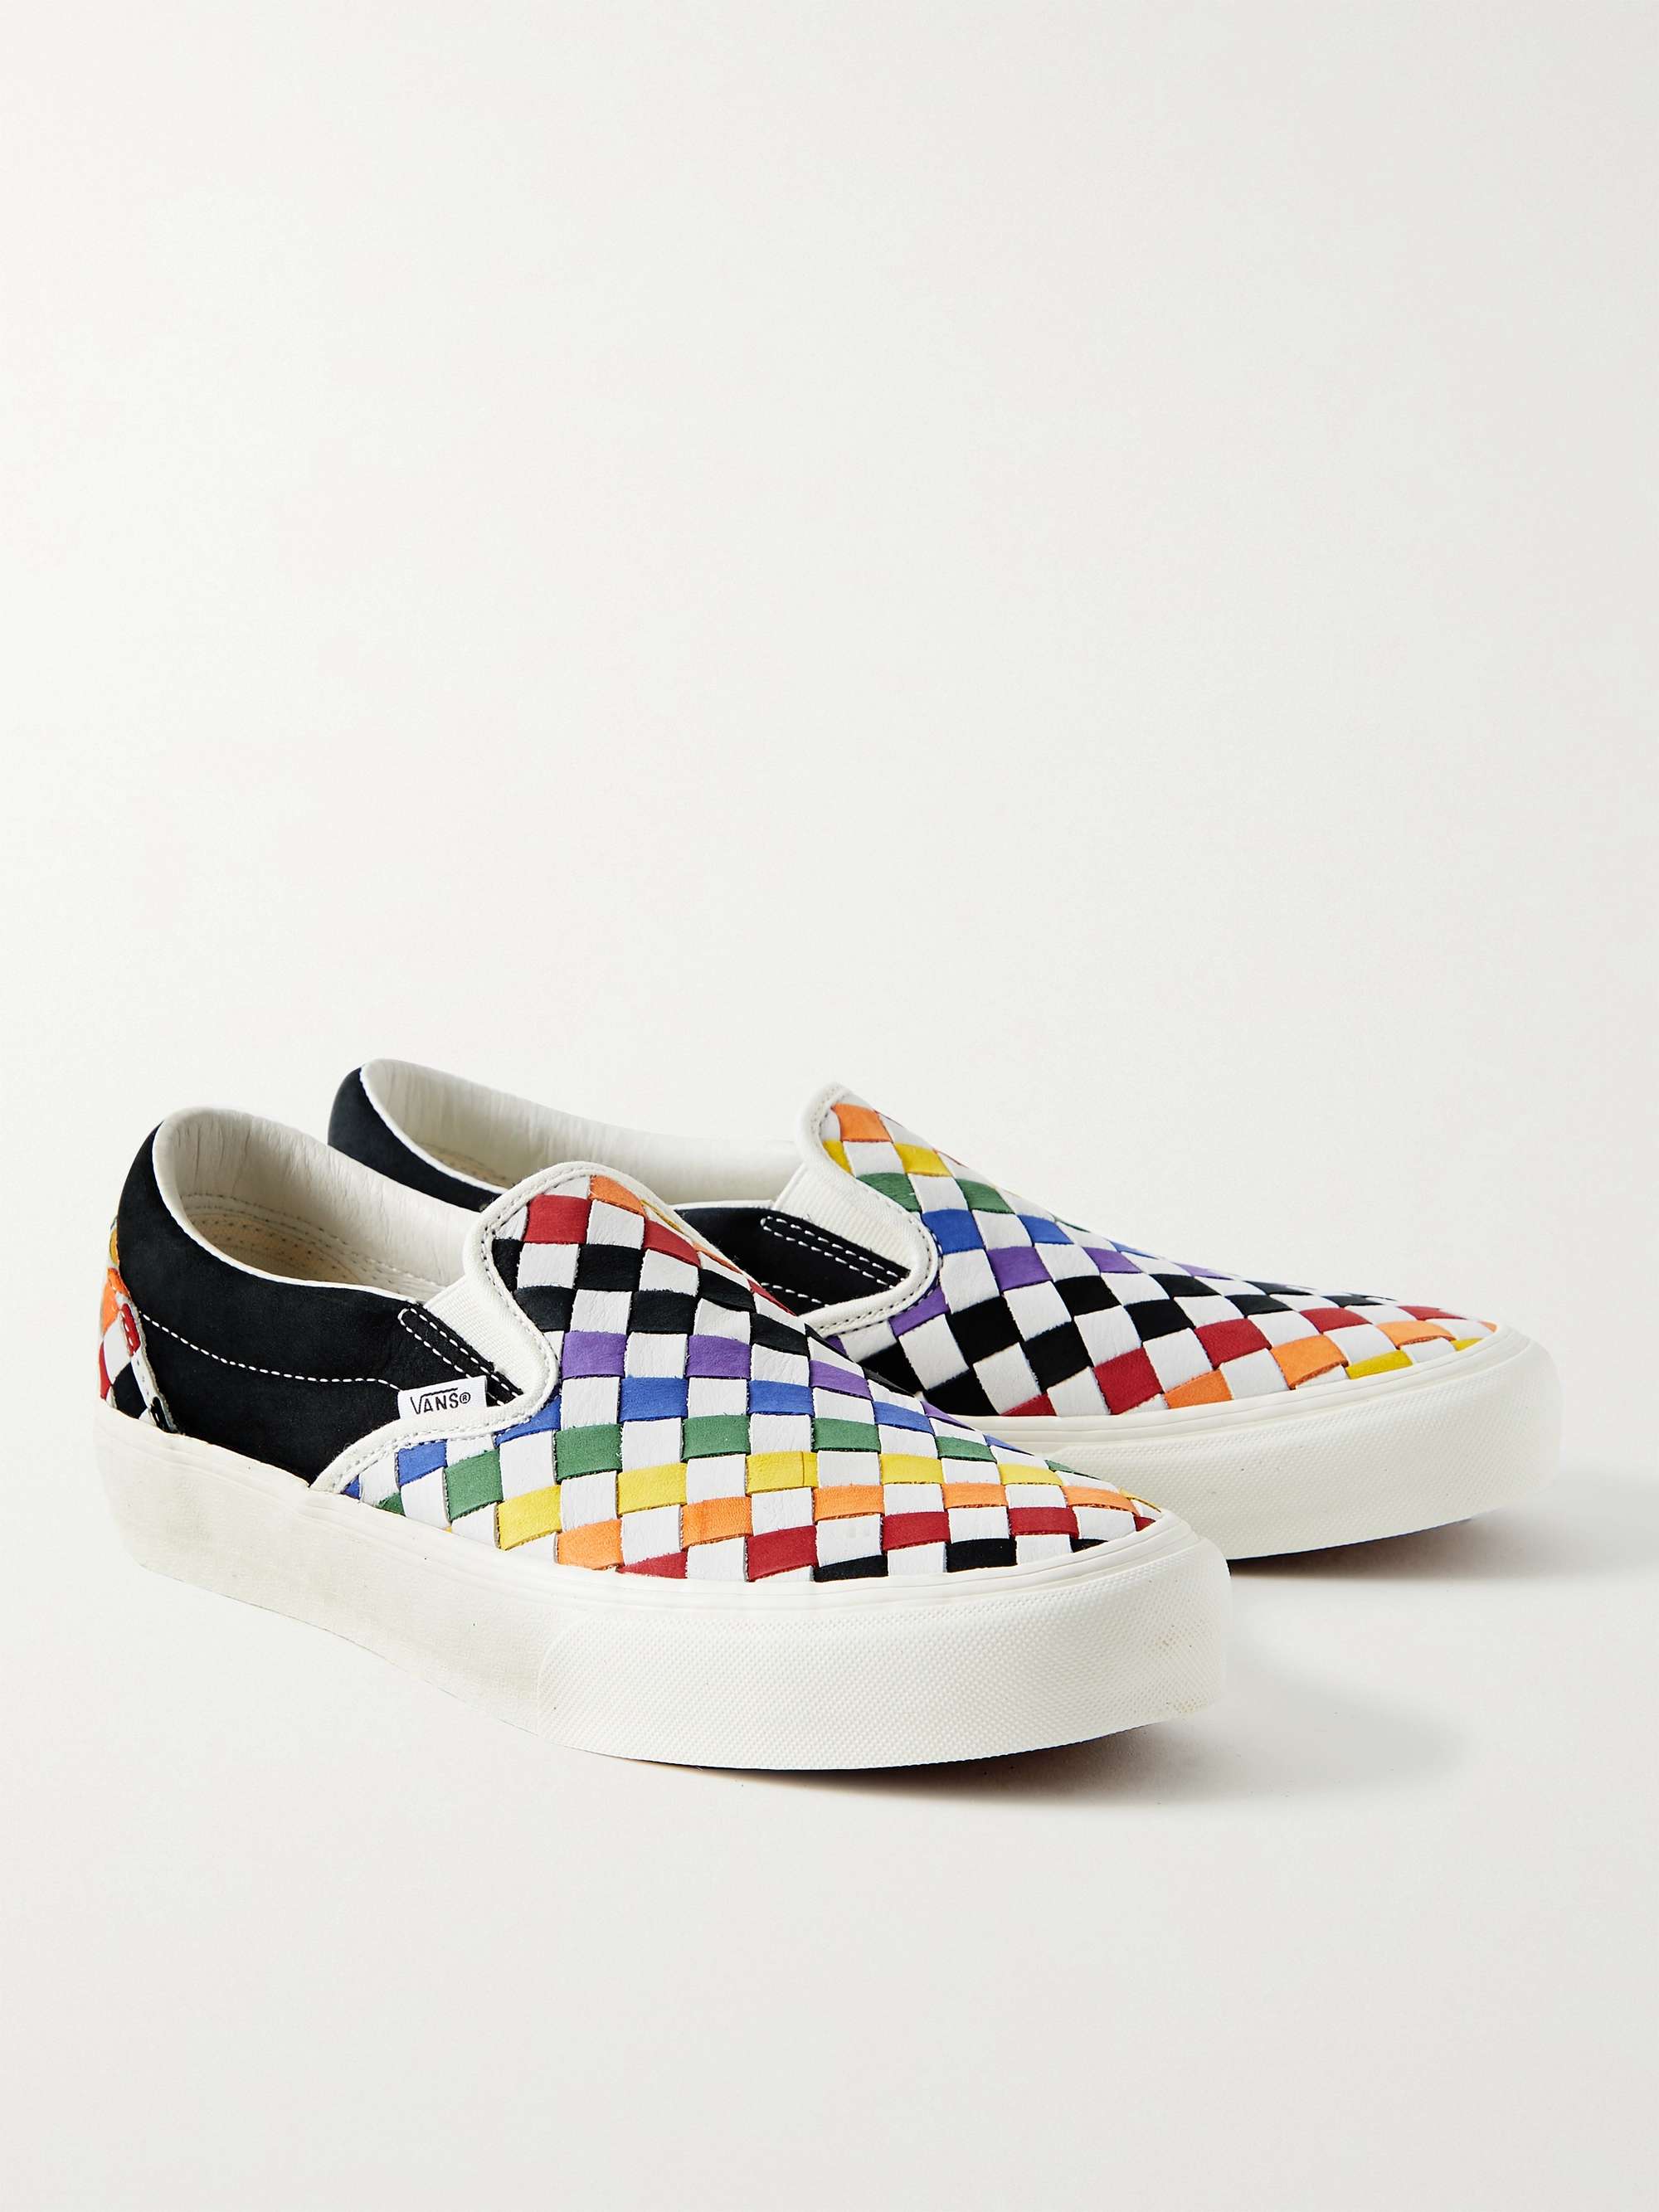 VANS UA Classic VLT LX Nubuck and Woven Leather Slip-On Sneakers